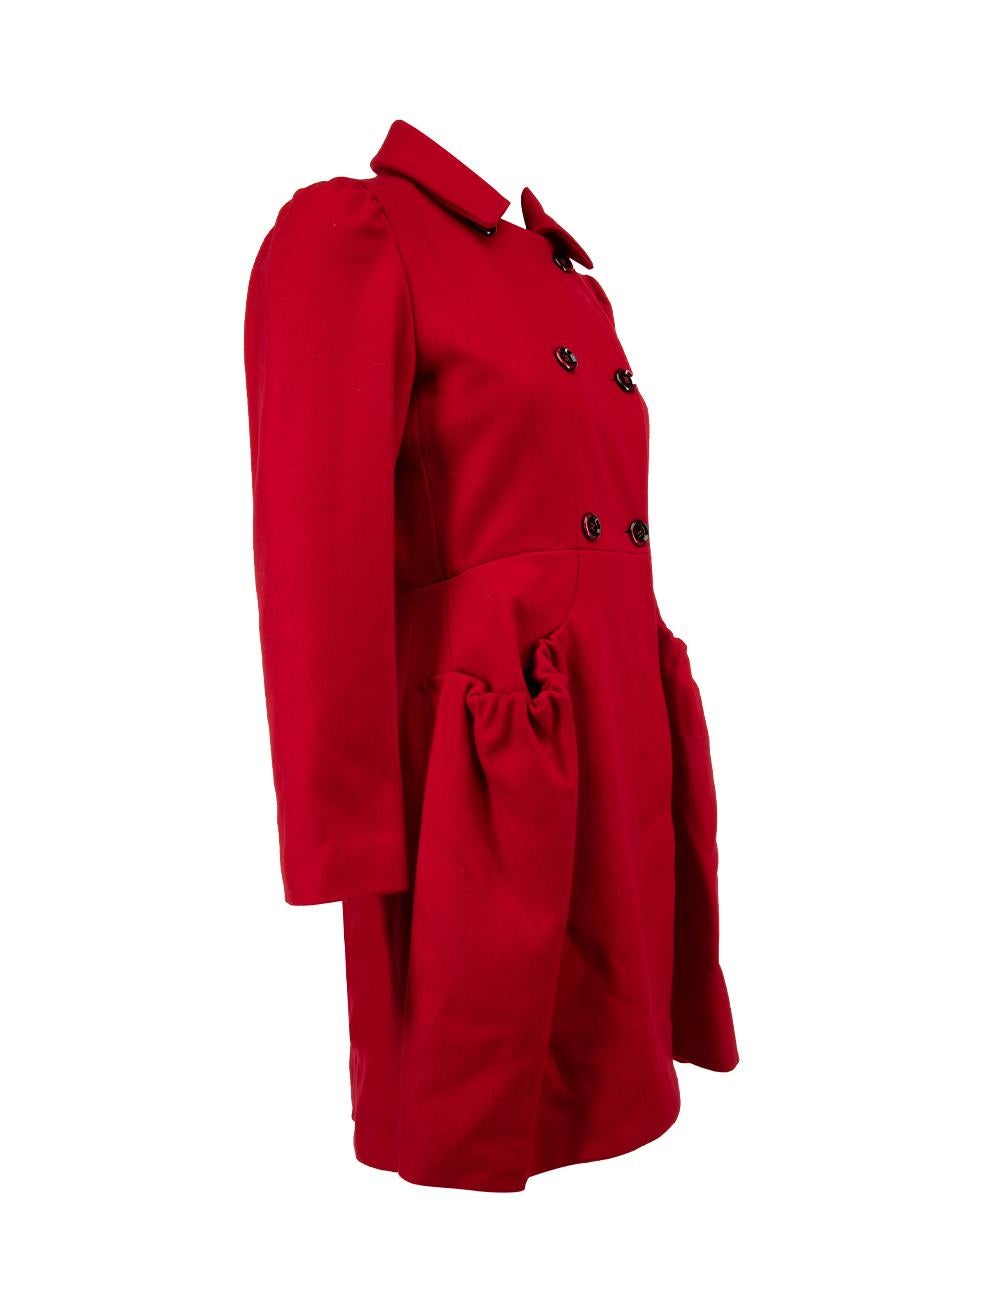 CONDITION is Very good. Hardly any visible wear to peacoat is evident on this used Miu Miu designer resale item. Details Red Wool Long sleeve Peacoat Button fastening Front pockets Made in Italy Composition 80% wool, 20% nylon Care instructions: